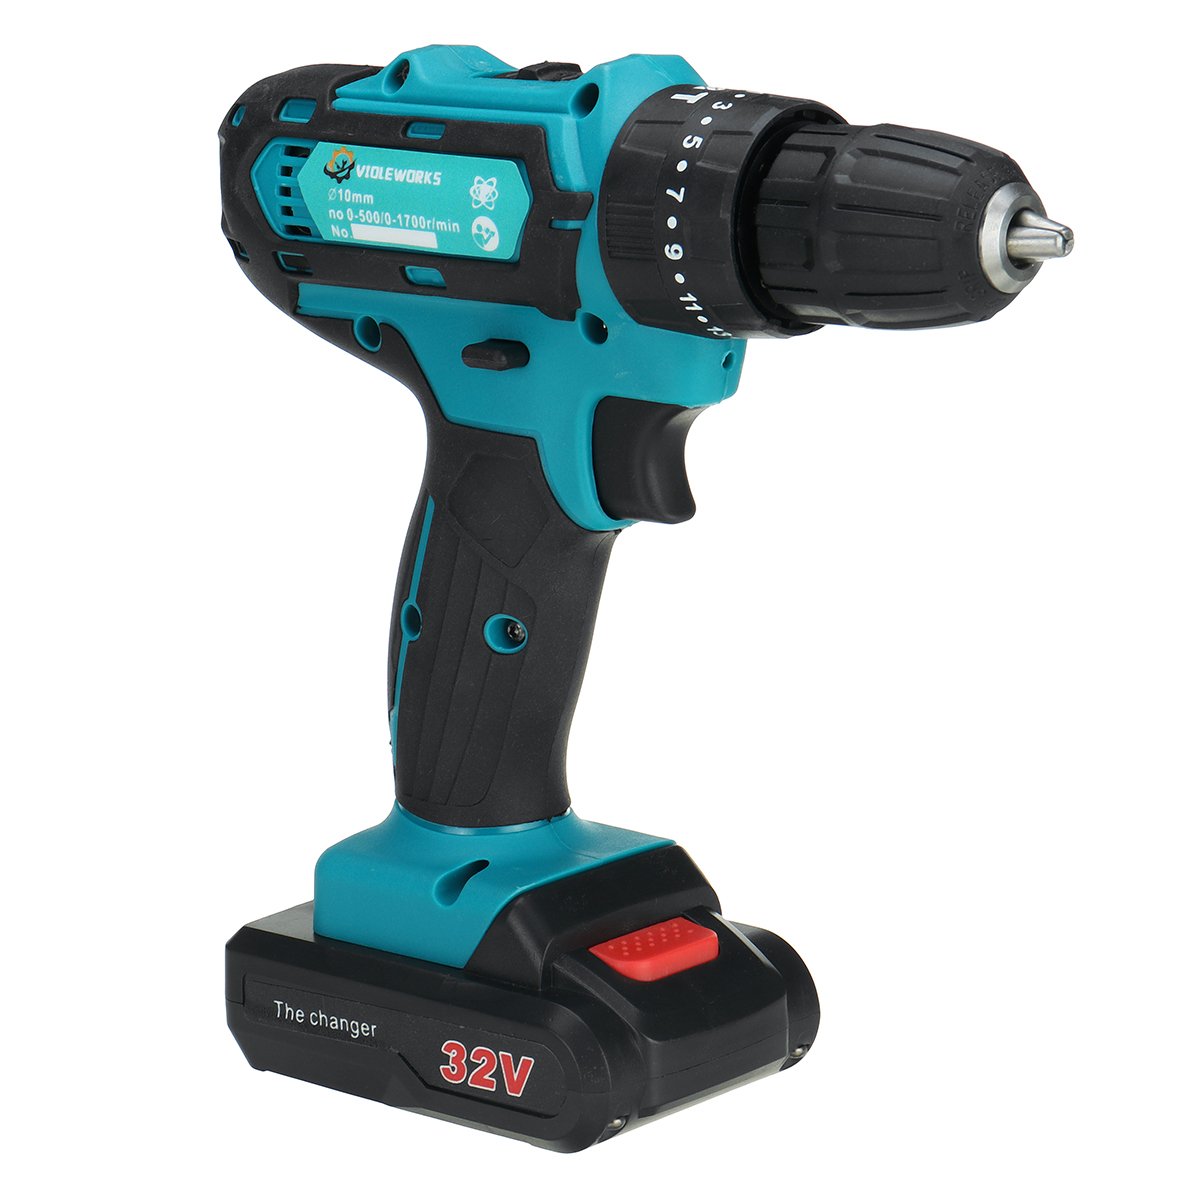 2-Speed-Power-Drills-6000mah-Cordless-Drill-3-IN-1-Electric-Screwdriver-Hammer-Drill-with-2pcs-Batte-1416071-8